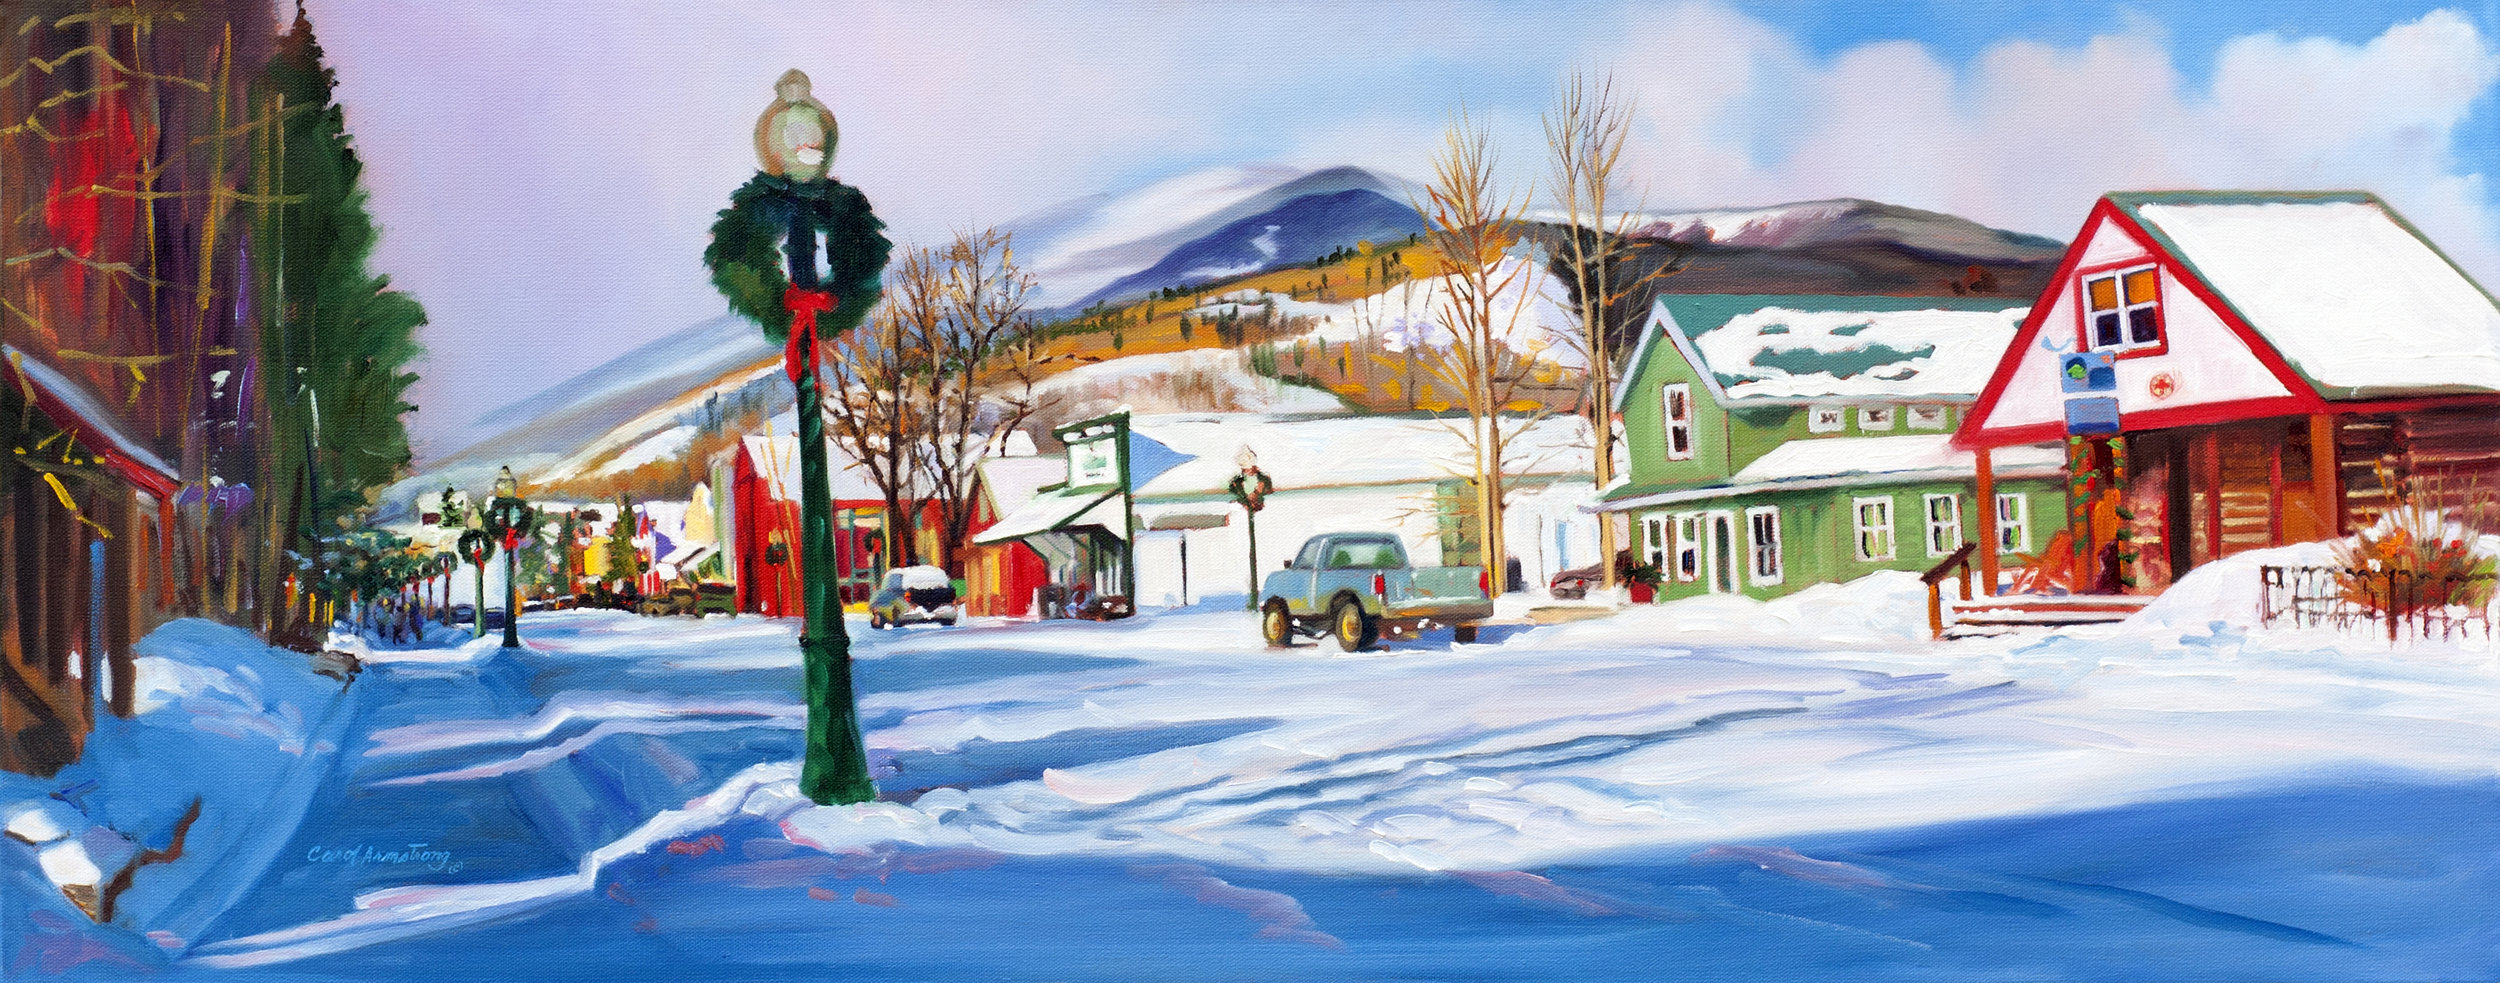 Christmas in Crested Butte